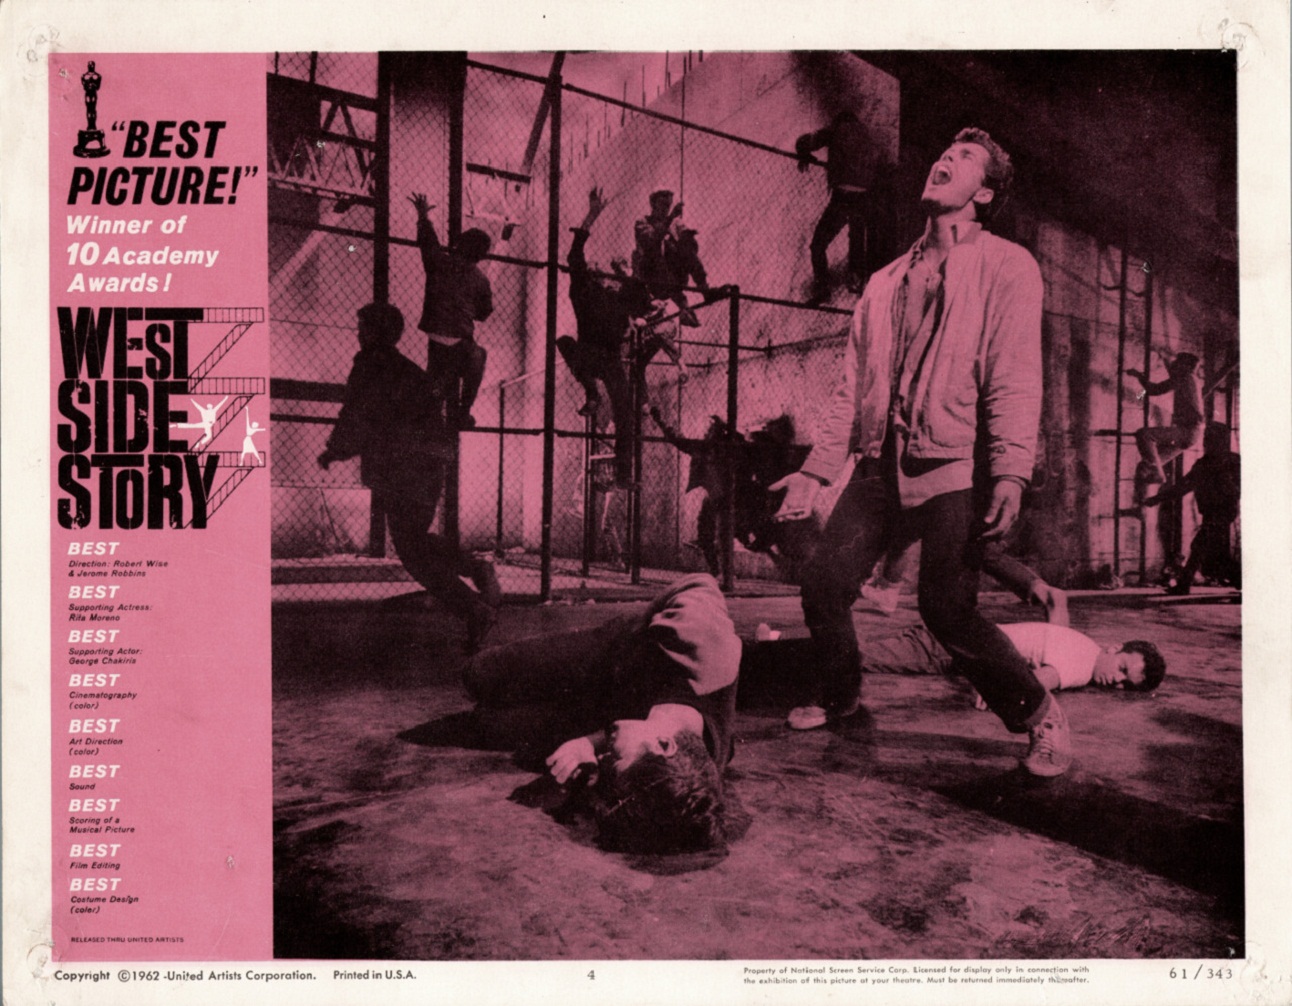 West Side Story (1961) Wallpaper and Background Imagex1006